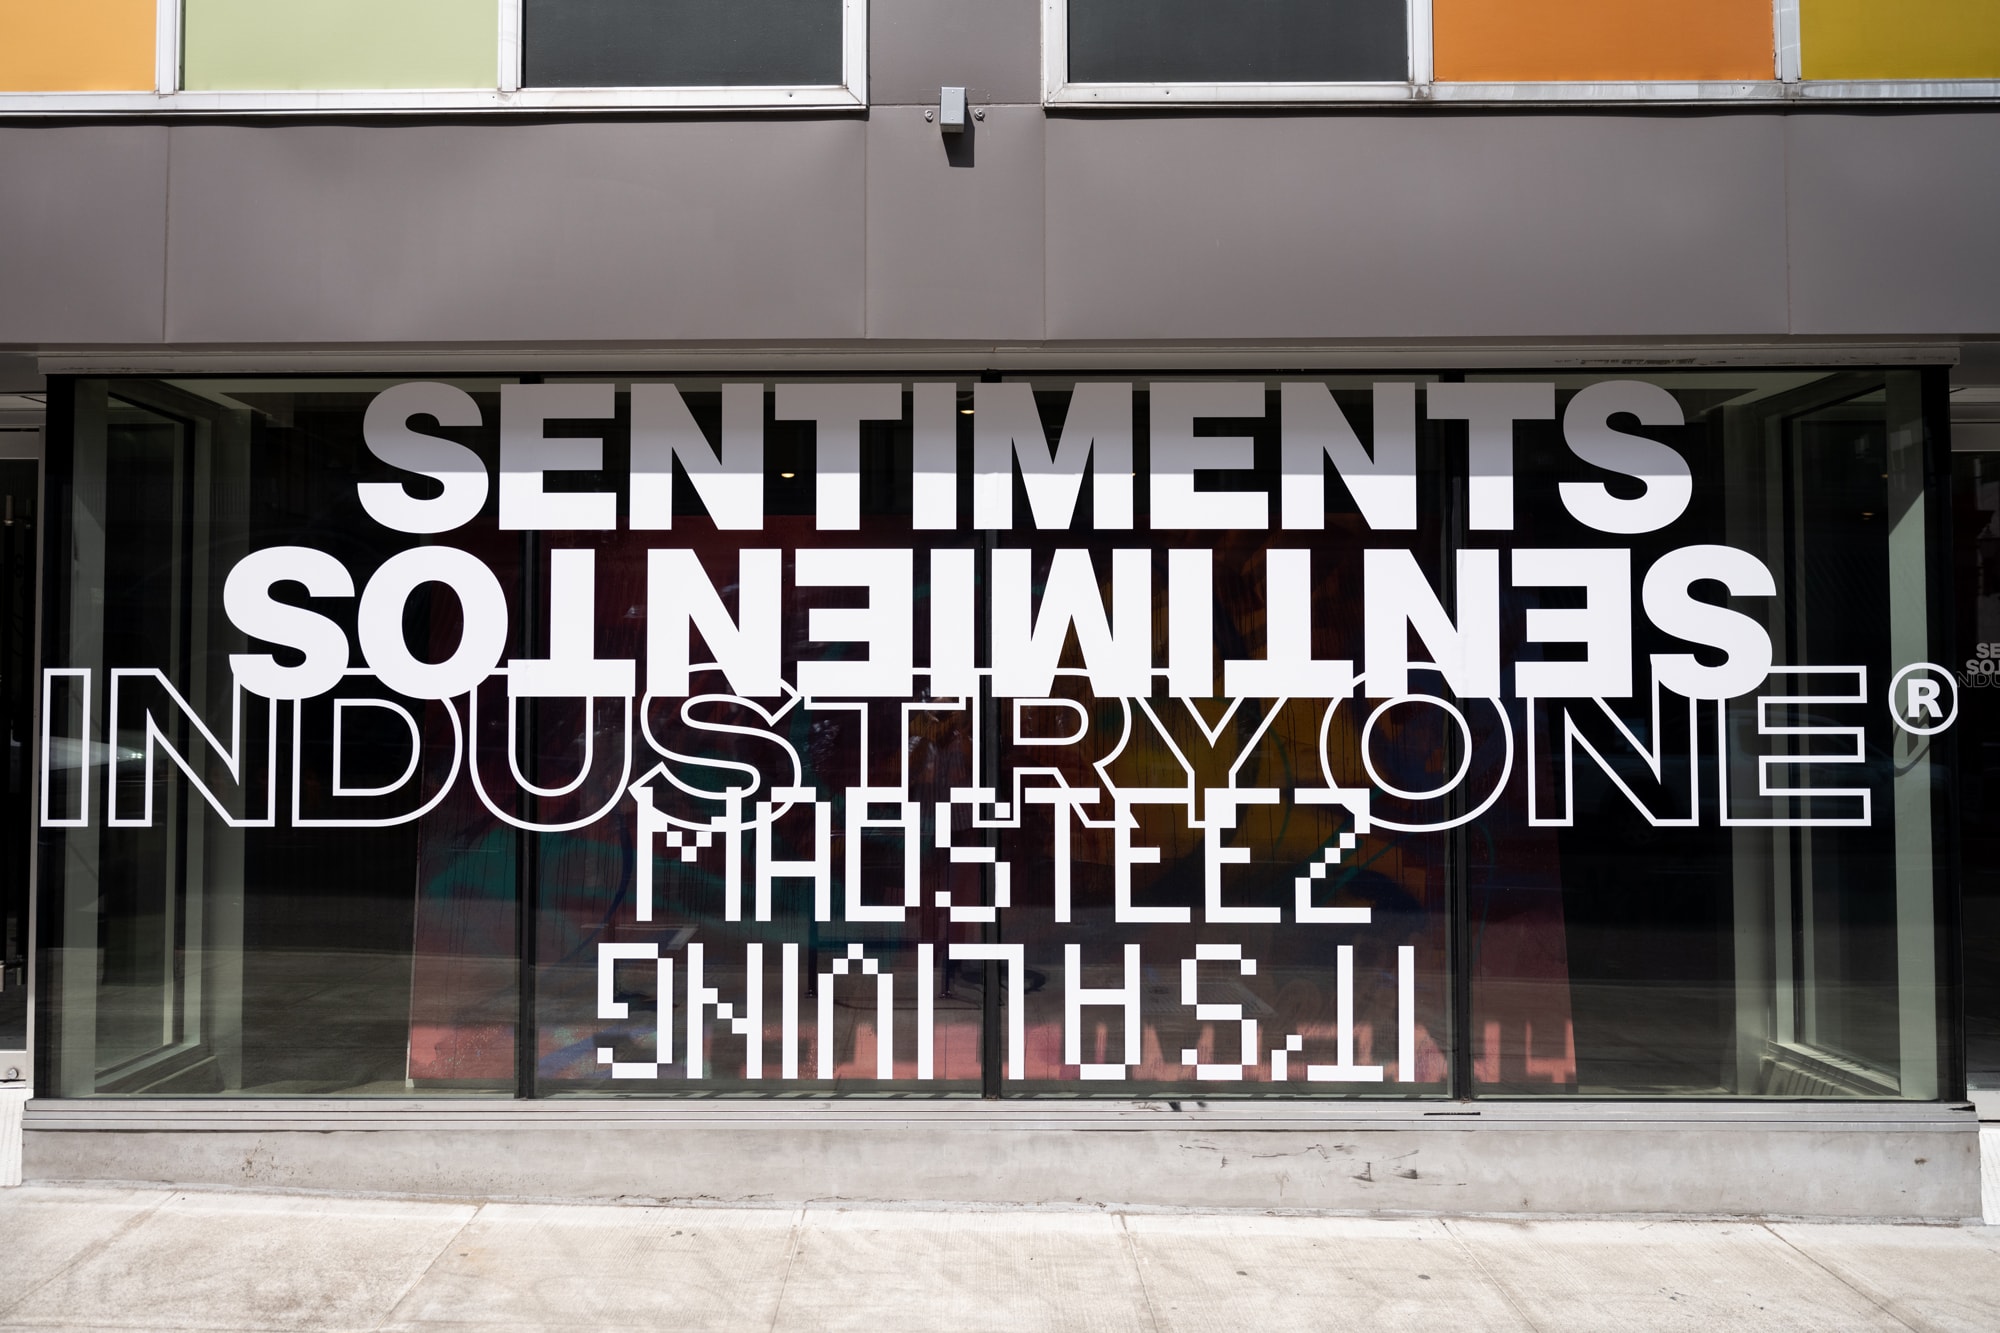 madsteez its a living industry one sentiments exhibition artworks paintings collaborations